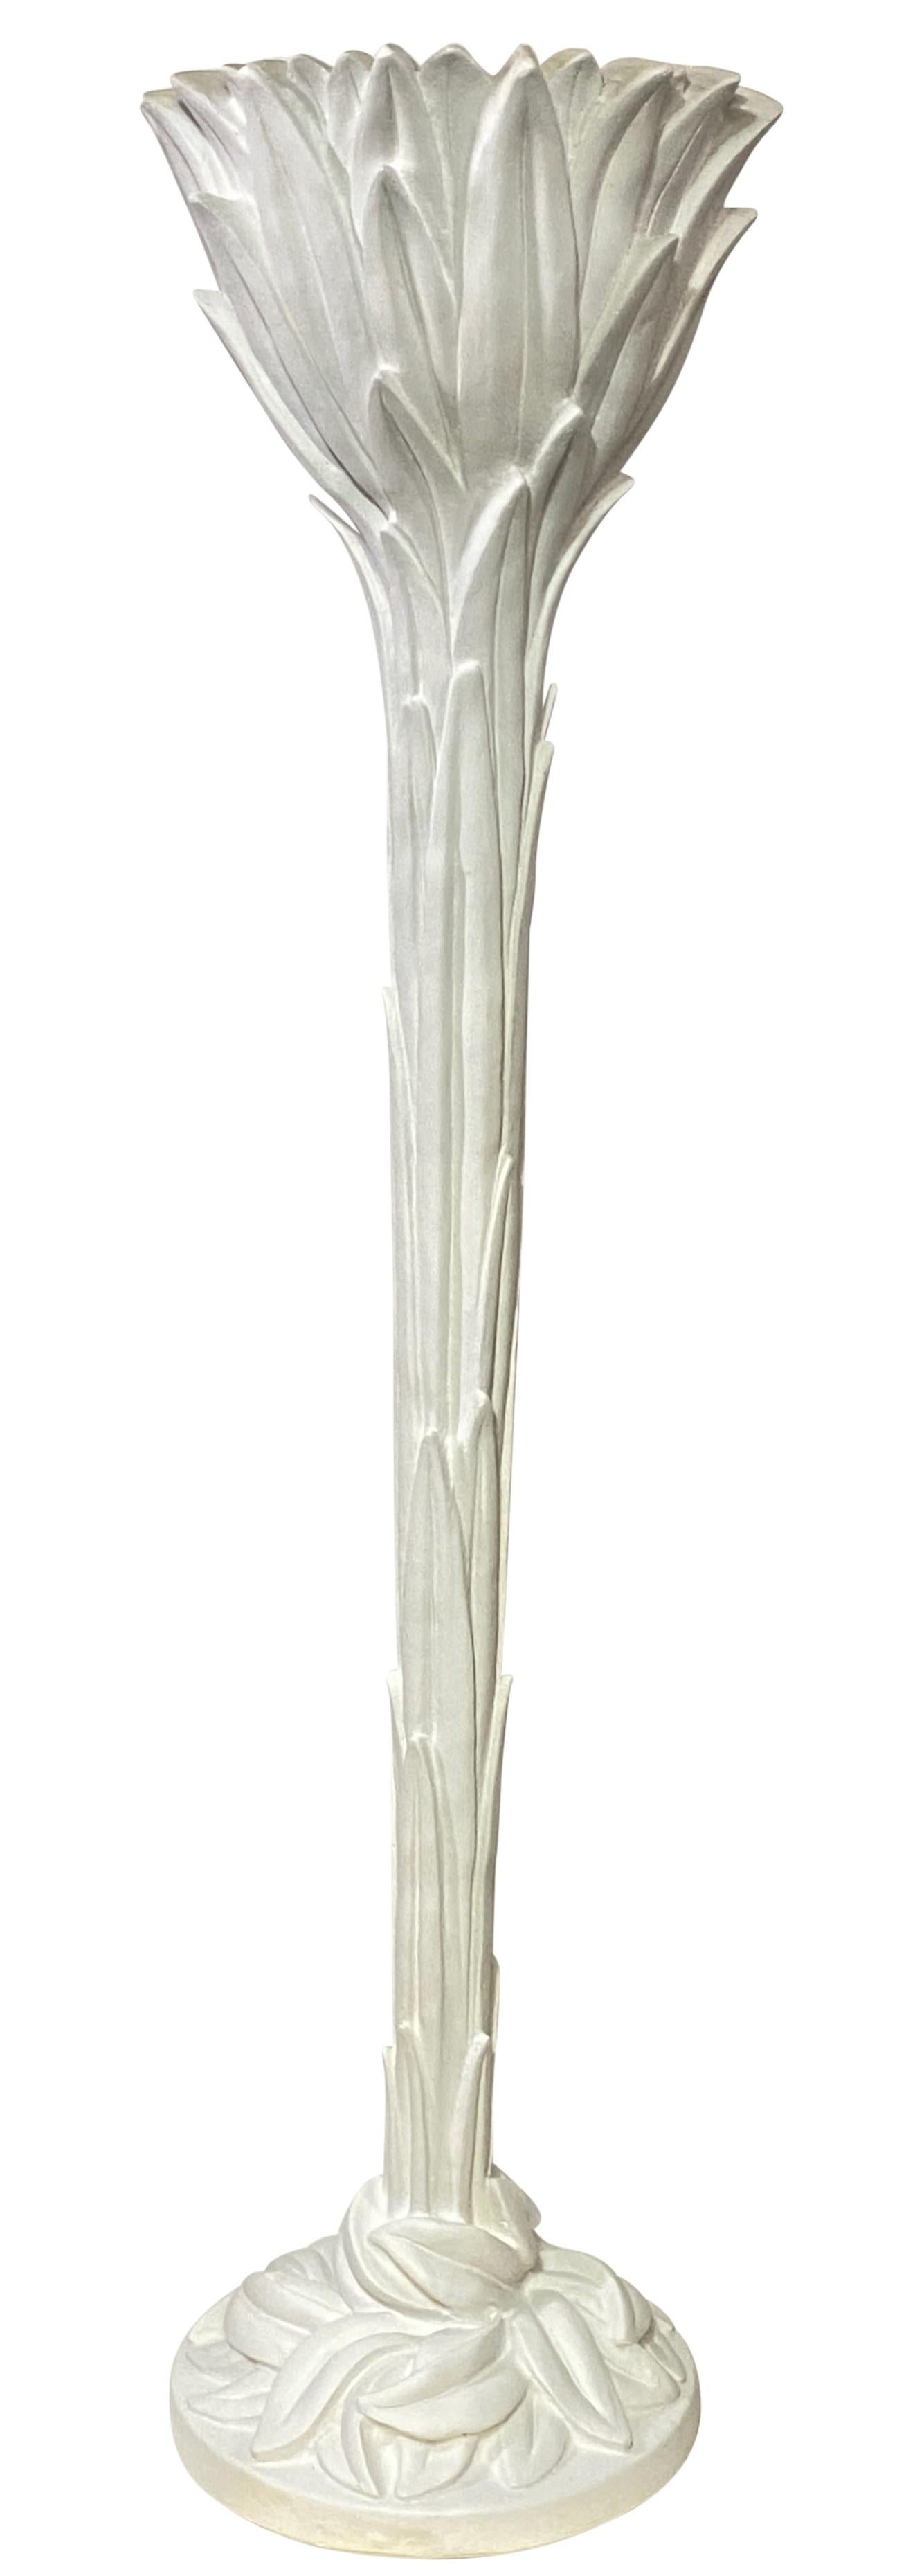 Vintage Palm Leaf Torchiere Floor Lamp in the manner of Serge Roche, Circa 1960 For Sale 1